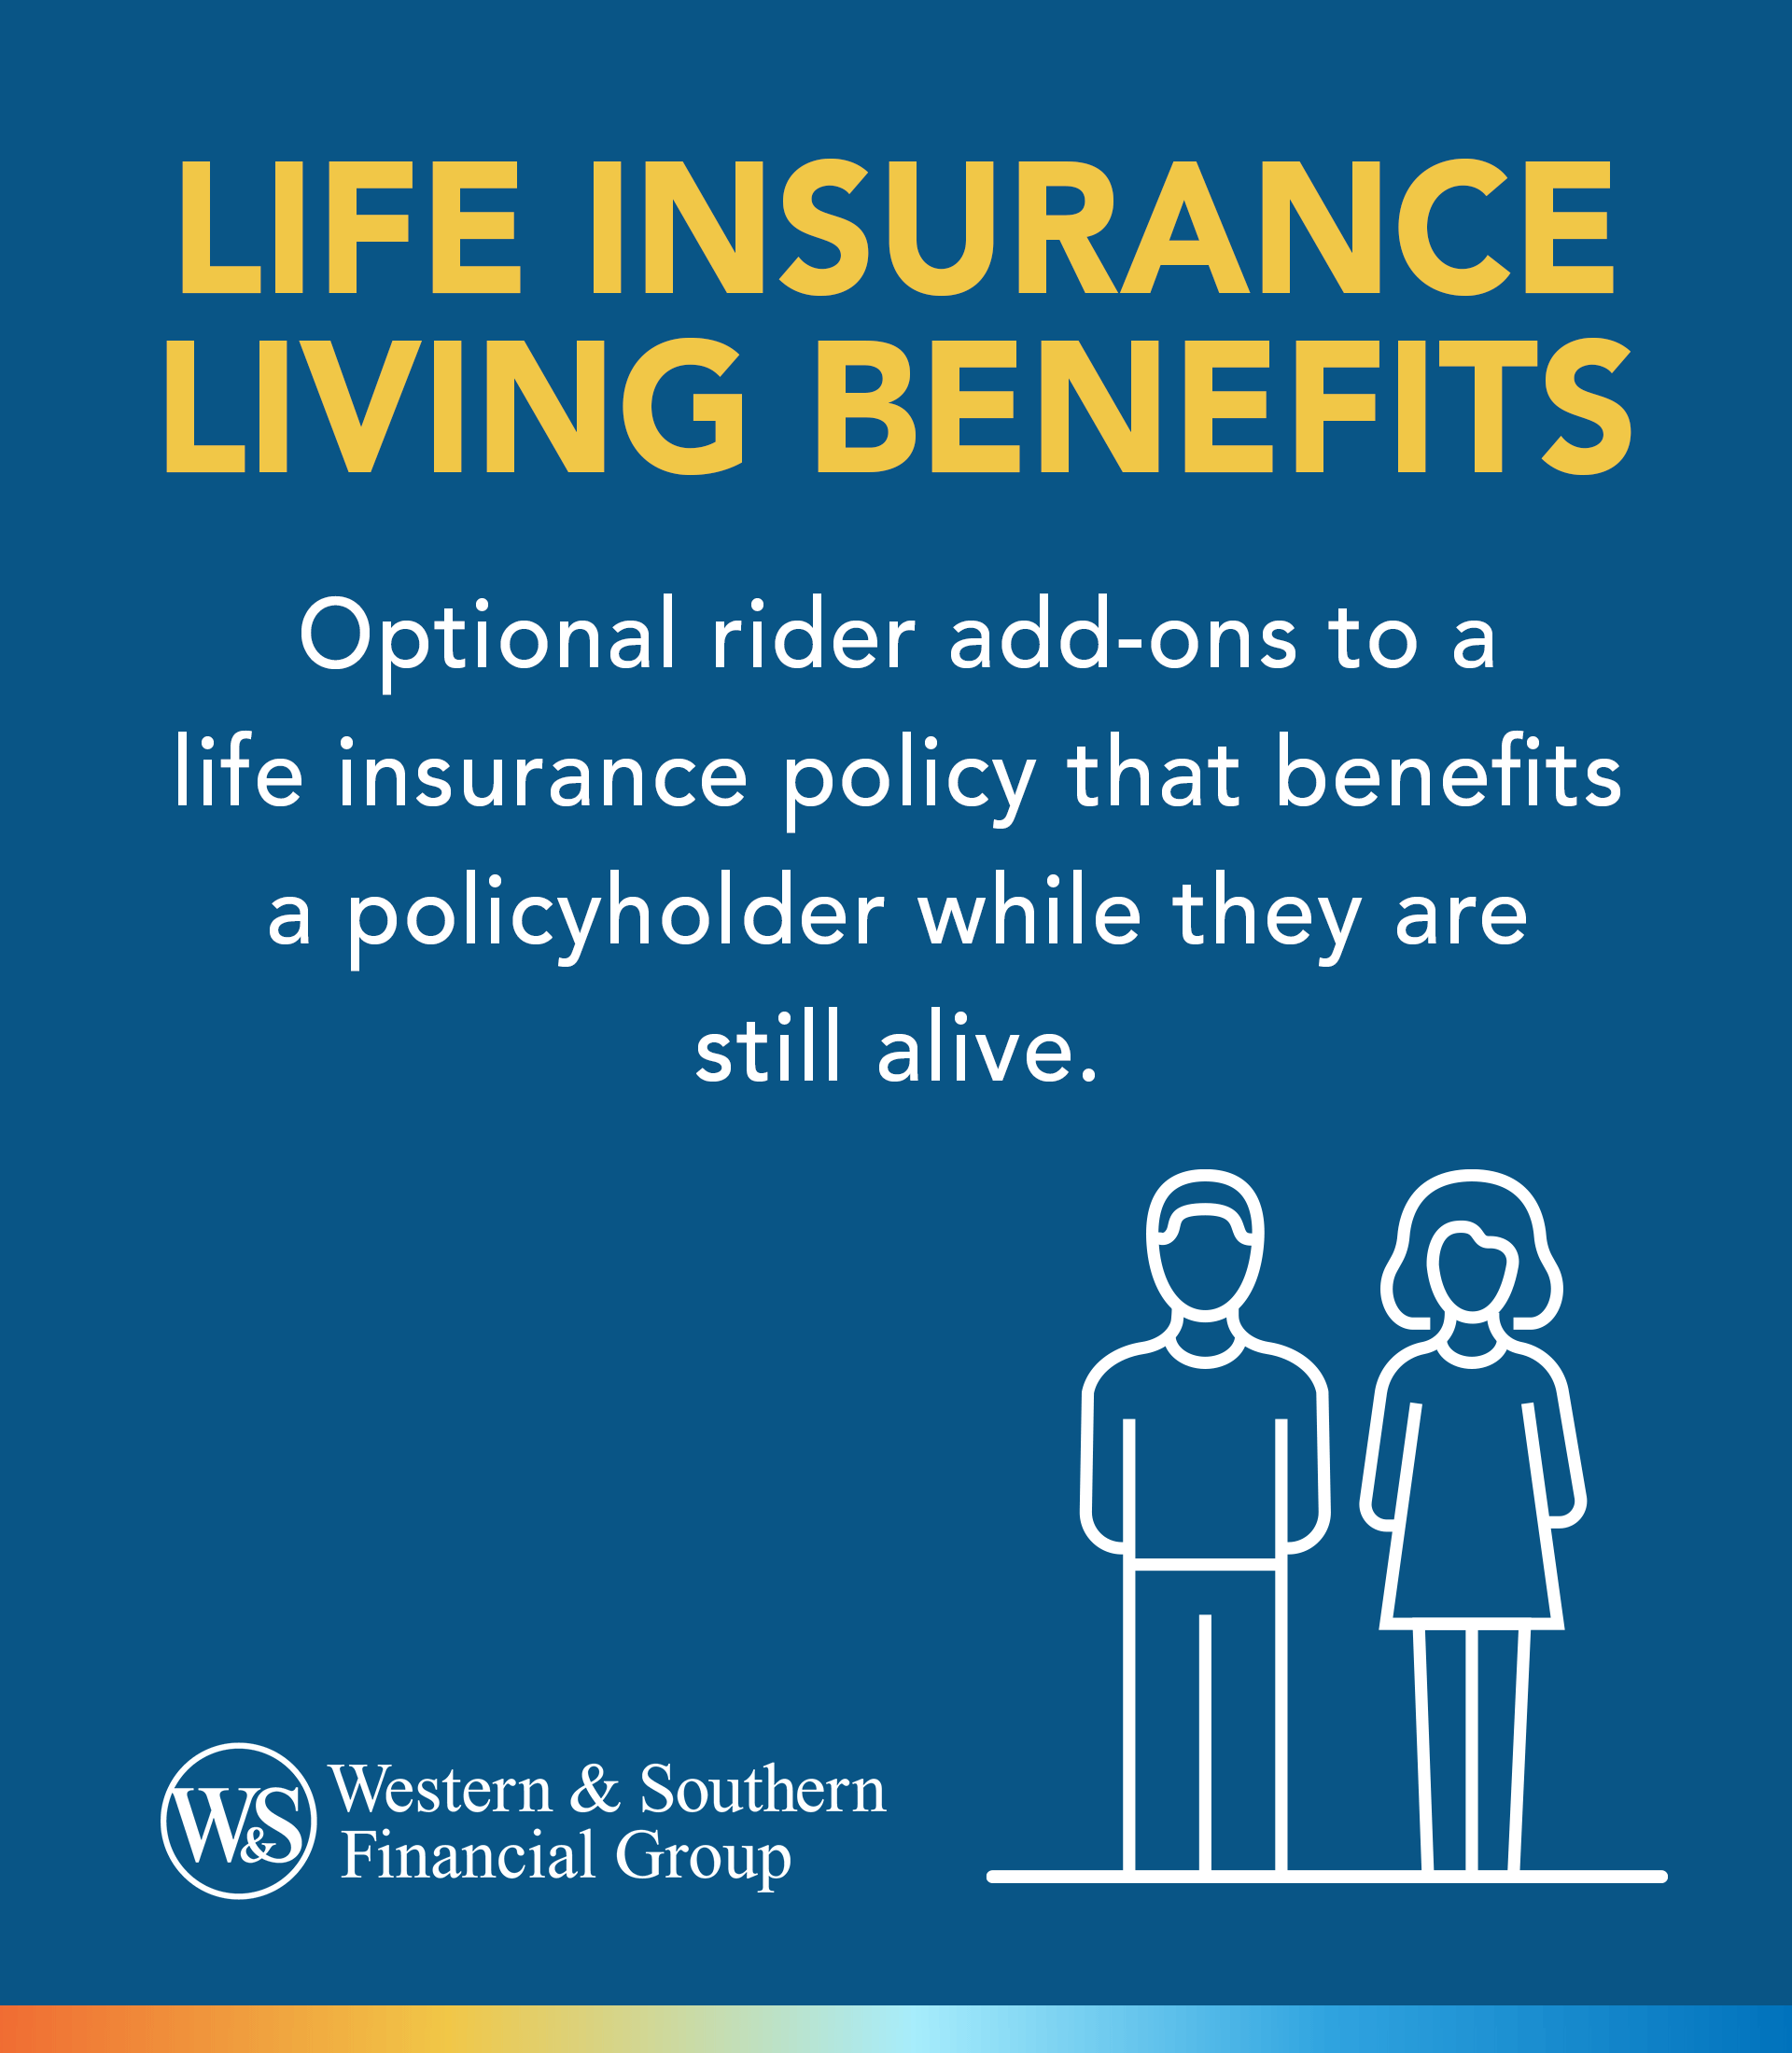 How to Benefit from Life Insurance?